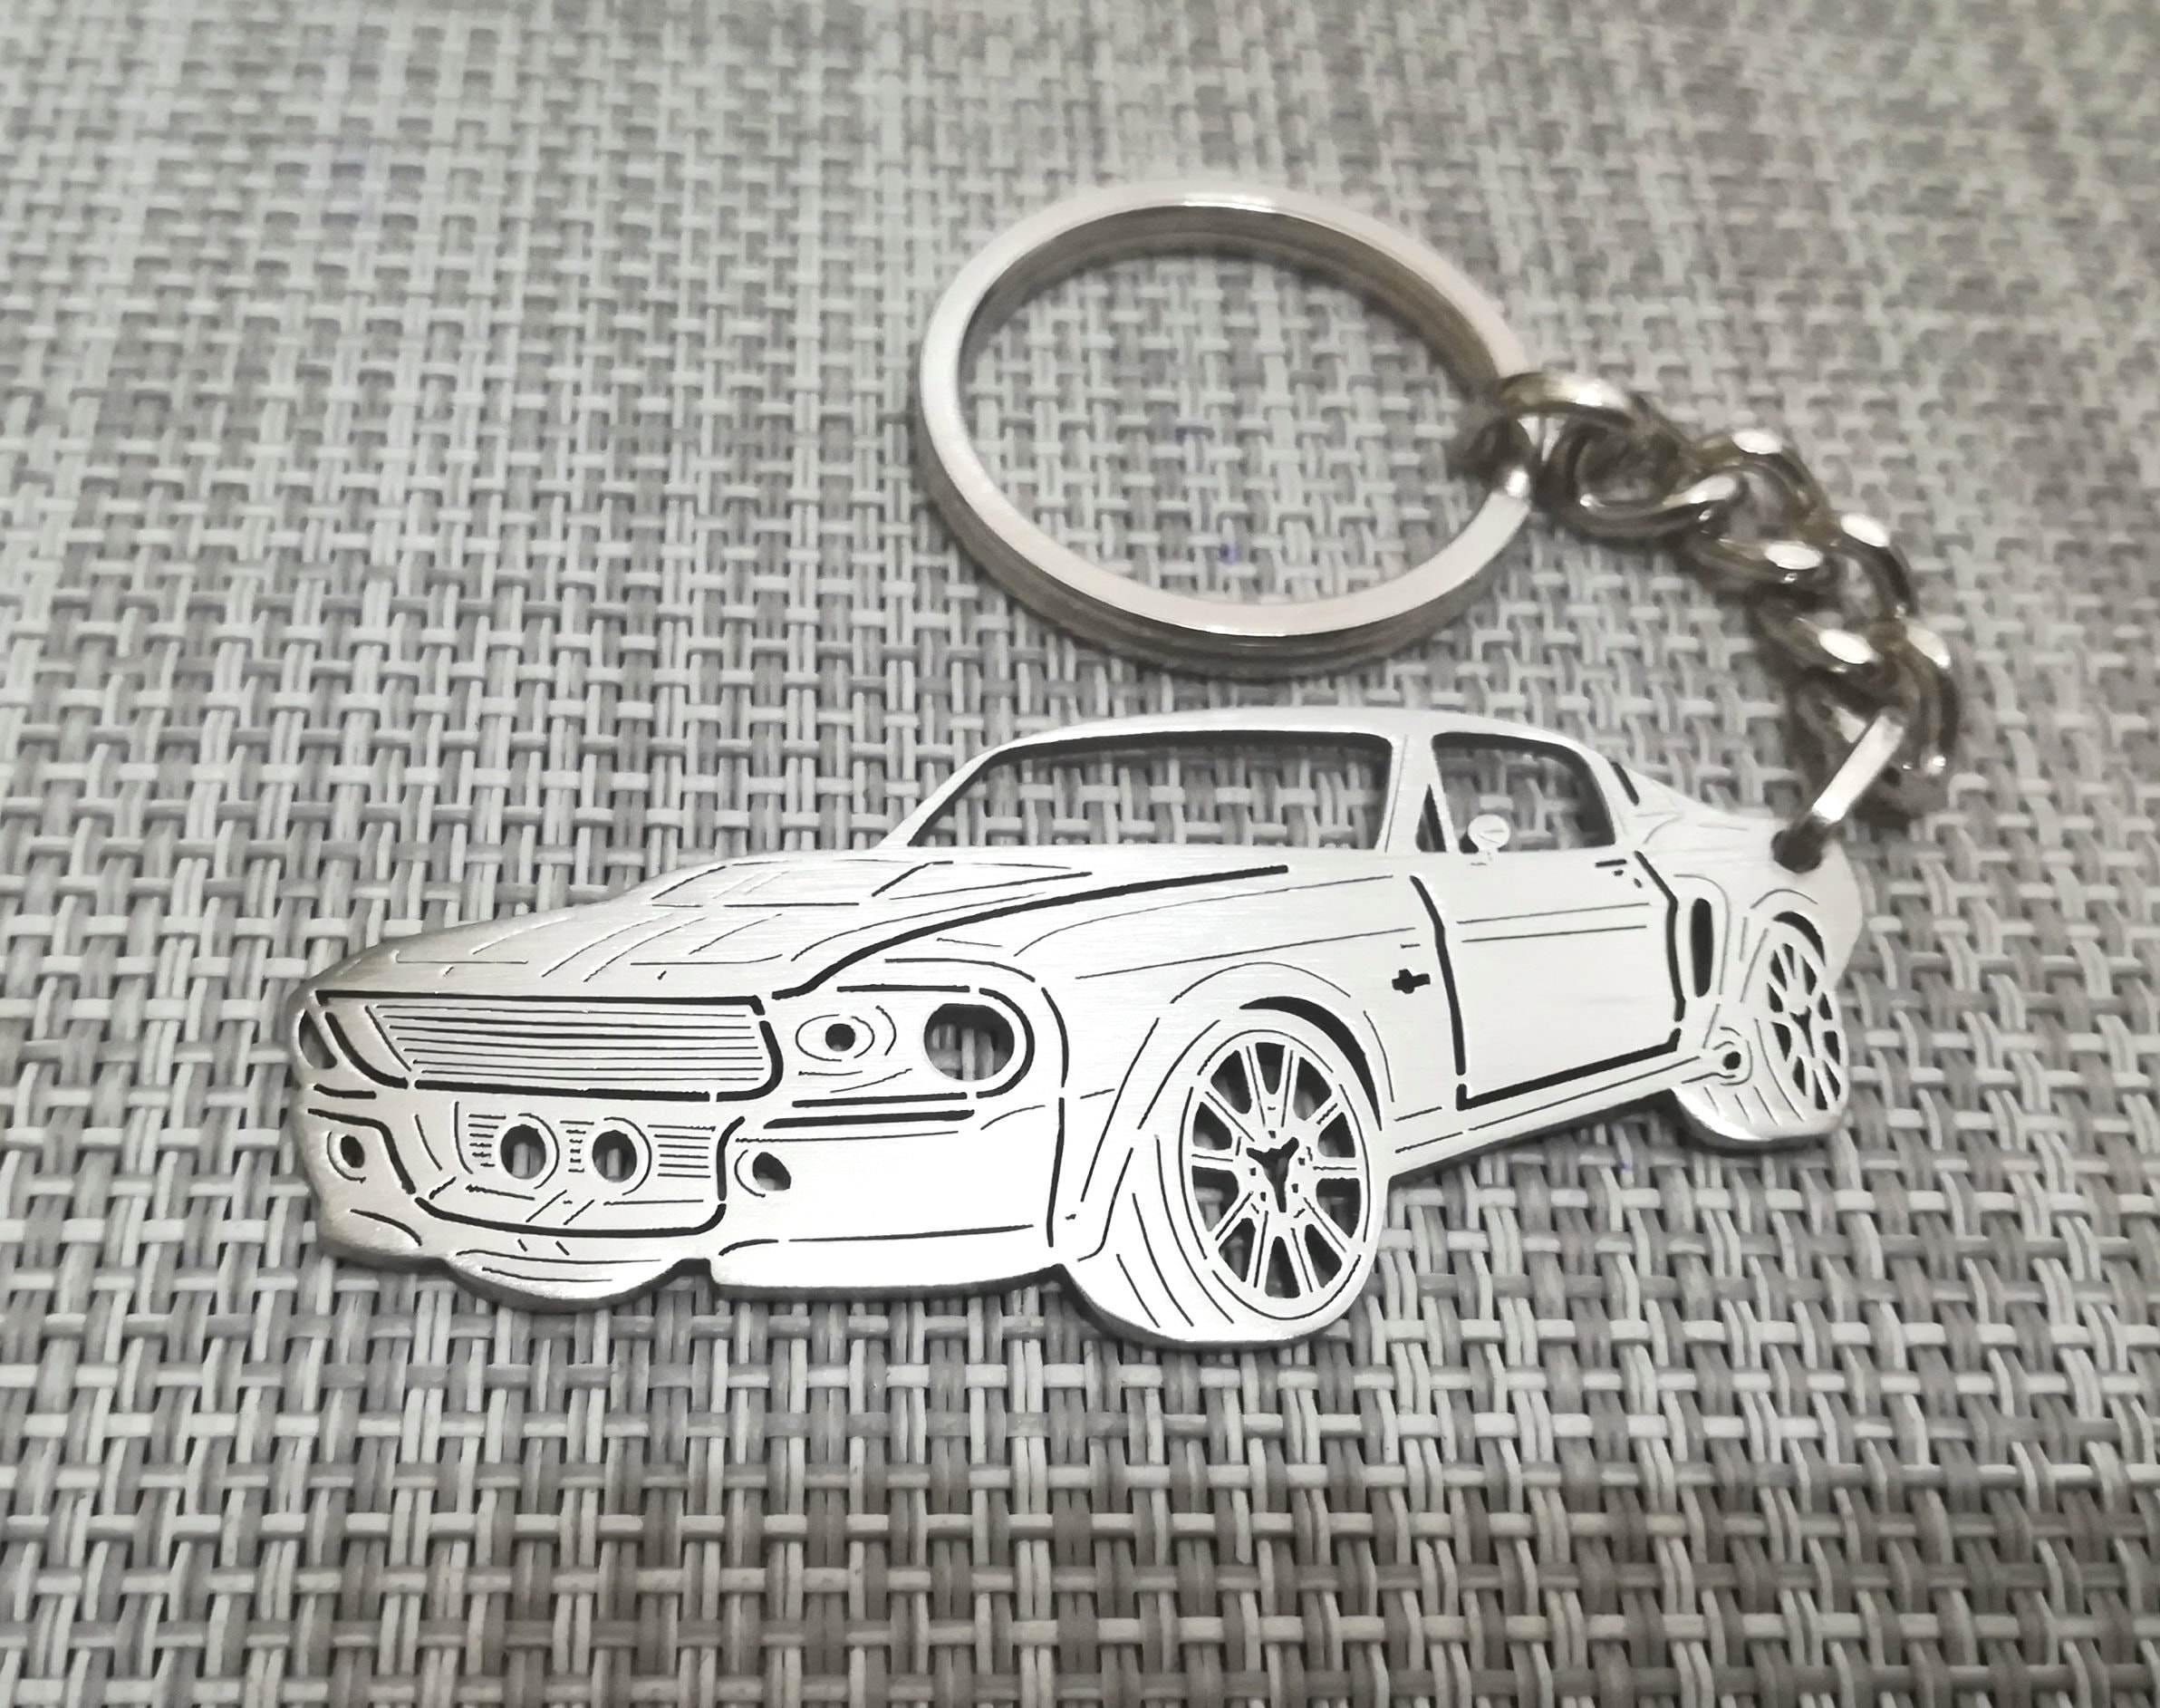 EmbRoom 5.0 Car Keychain Key Ring Replacement for 2011~2014 Mustang GT 500 Cobra (Chrome Red)